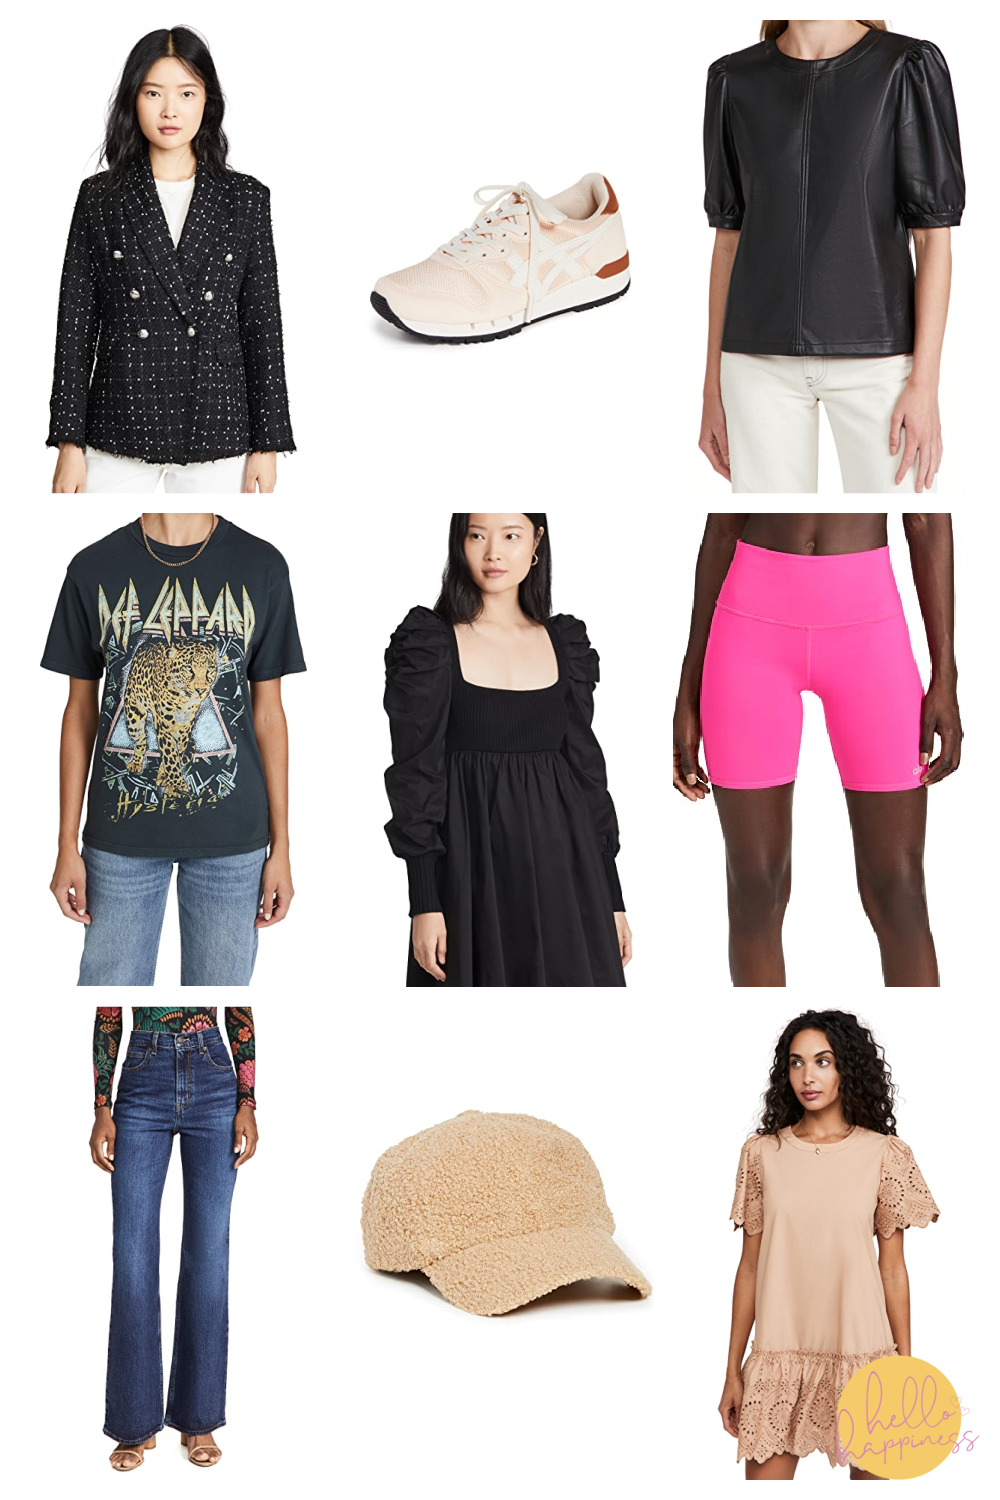 shopbop favorites $100 and under featured by top Nashville mom fashion blogger, Hello Happiness